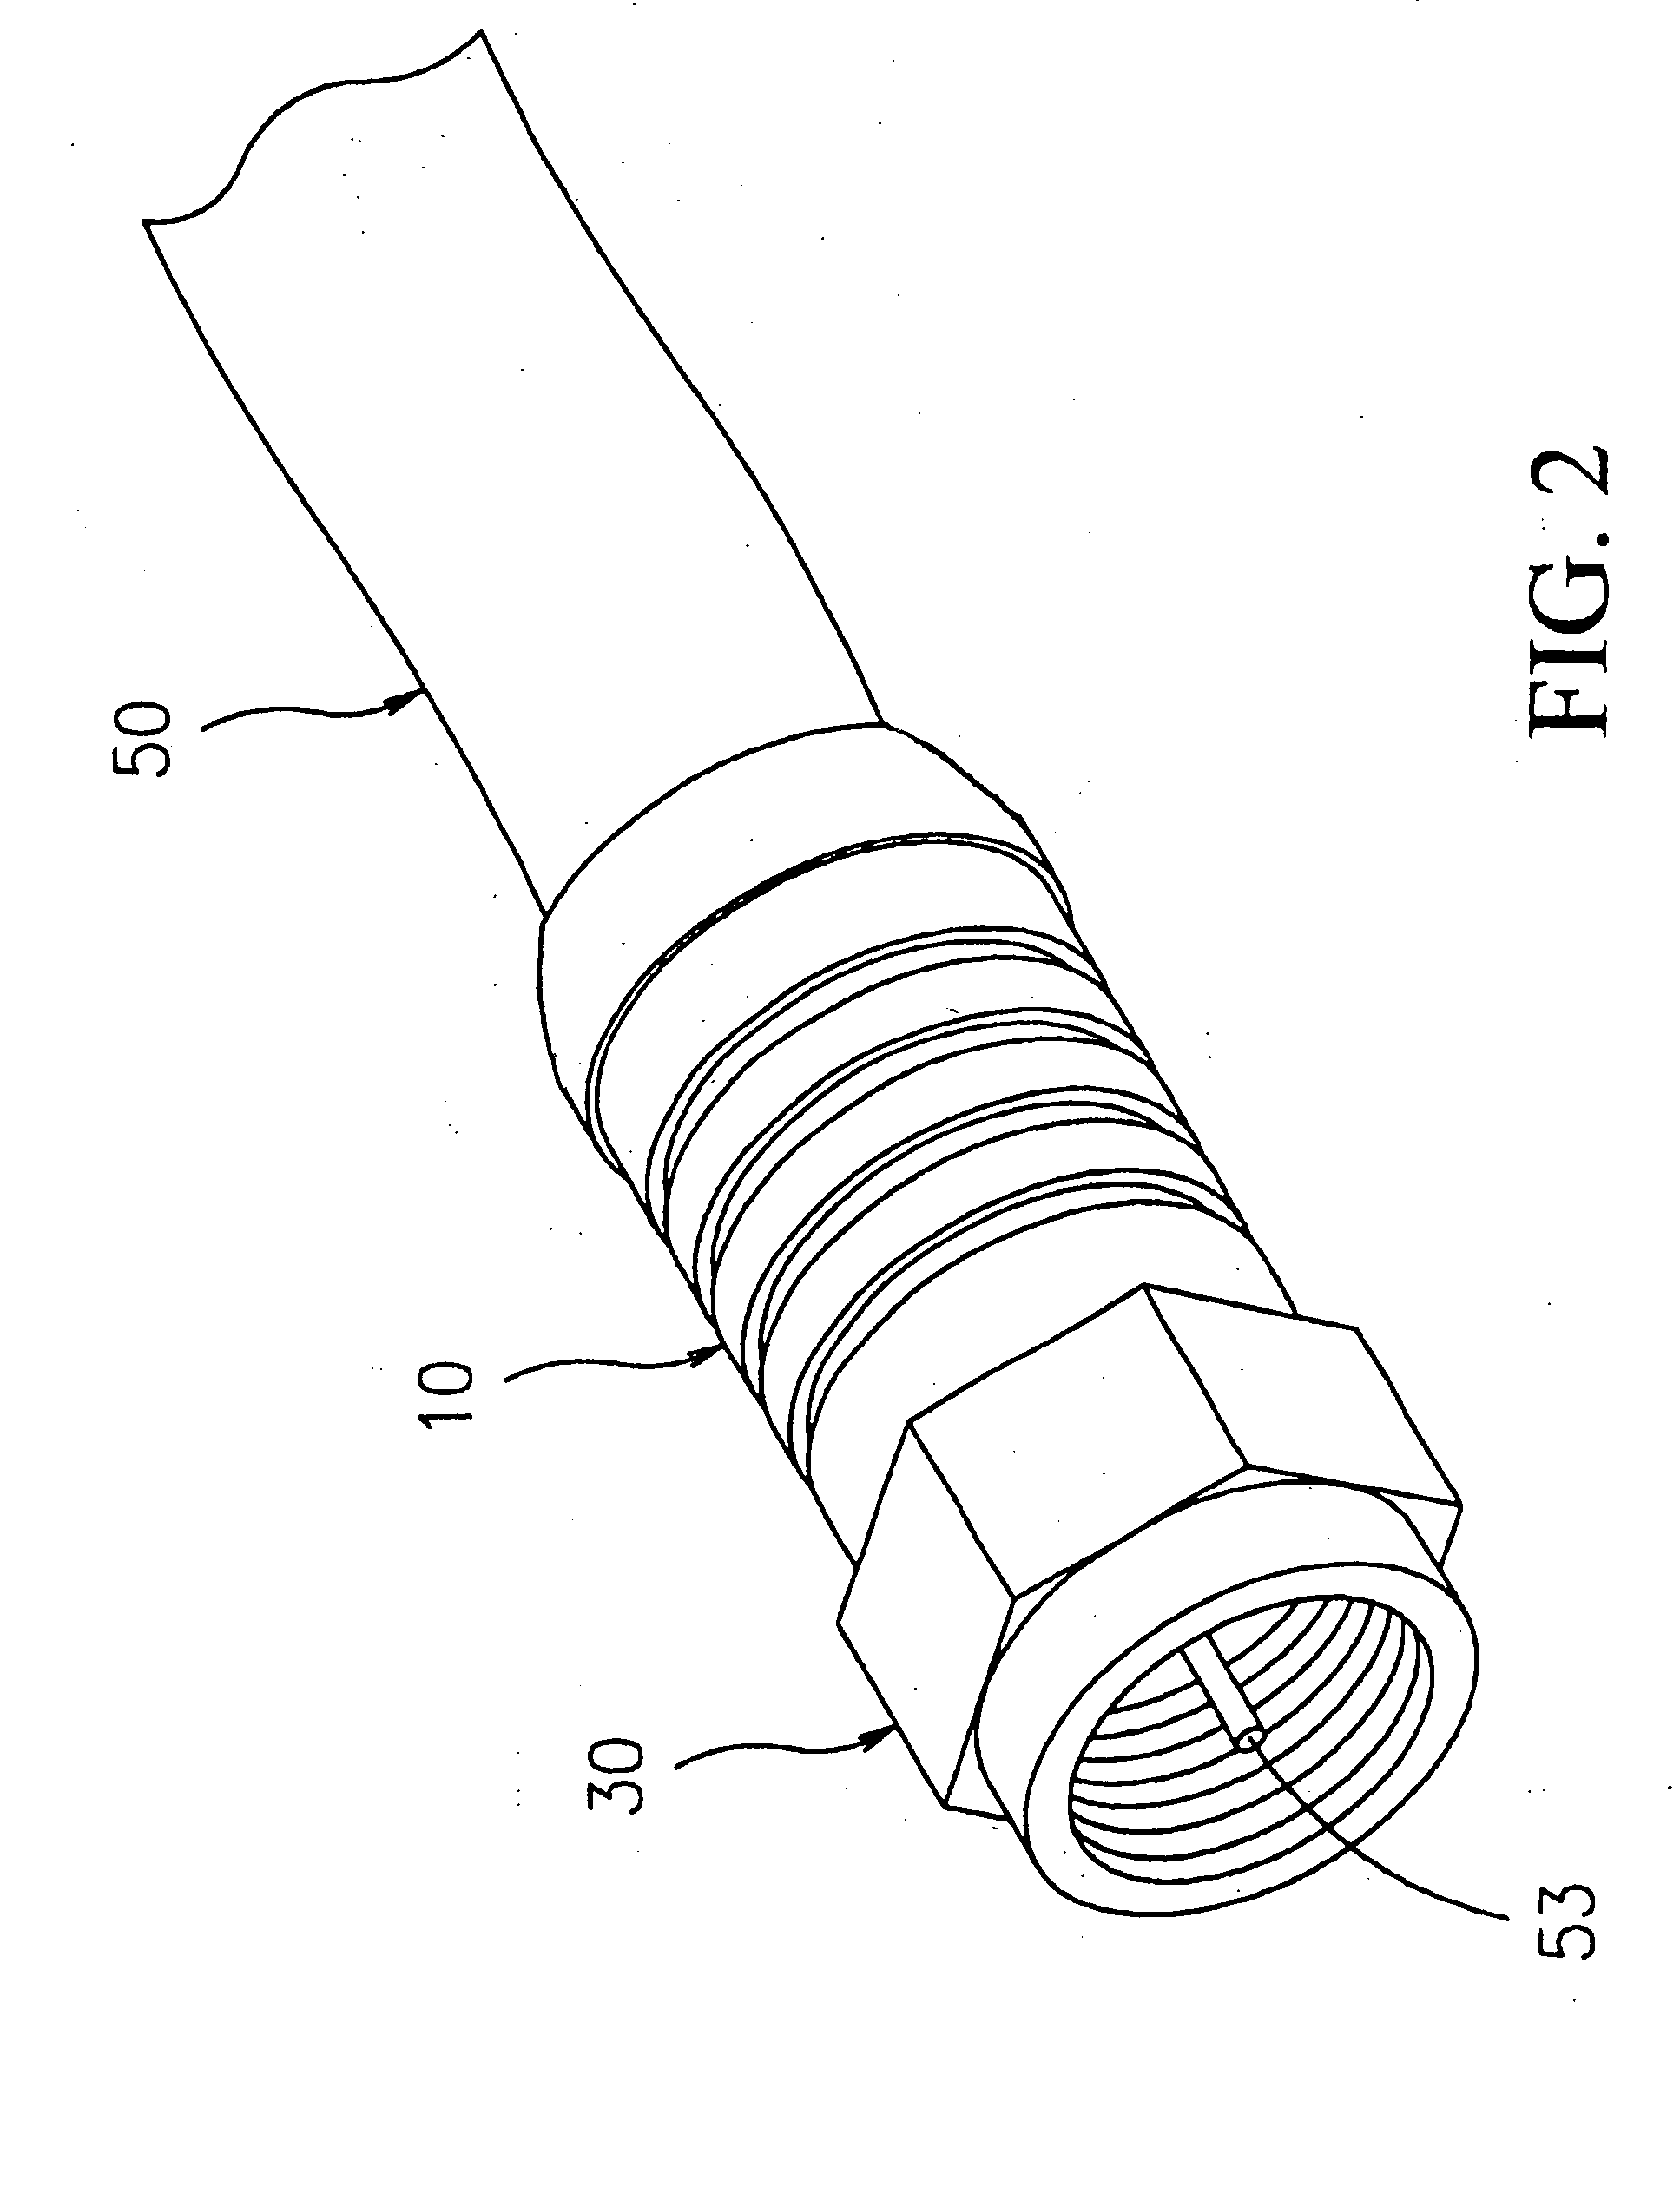 Connector for electrical cords and cables